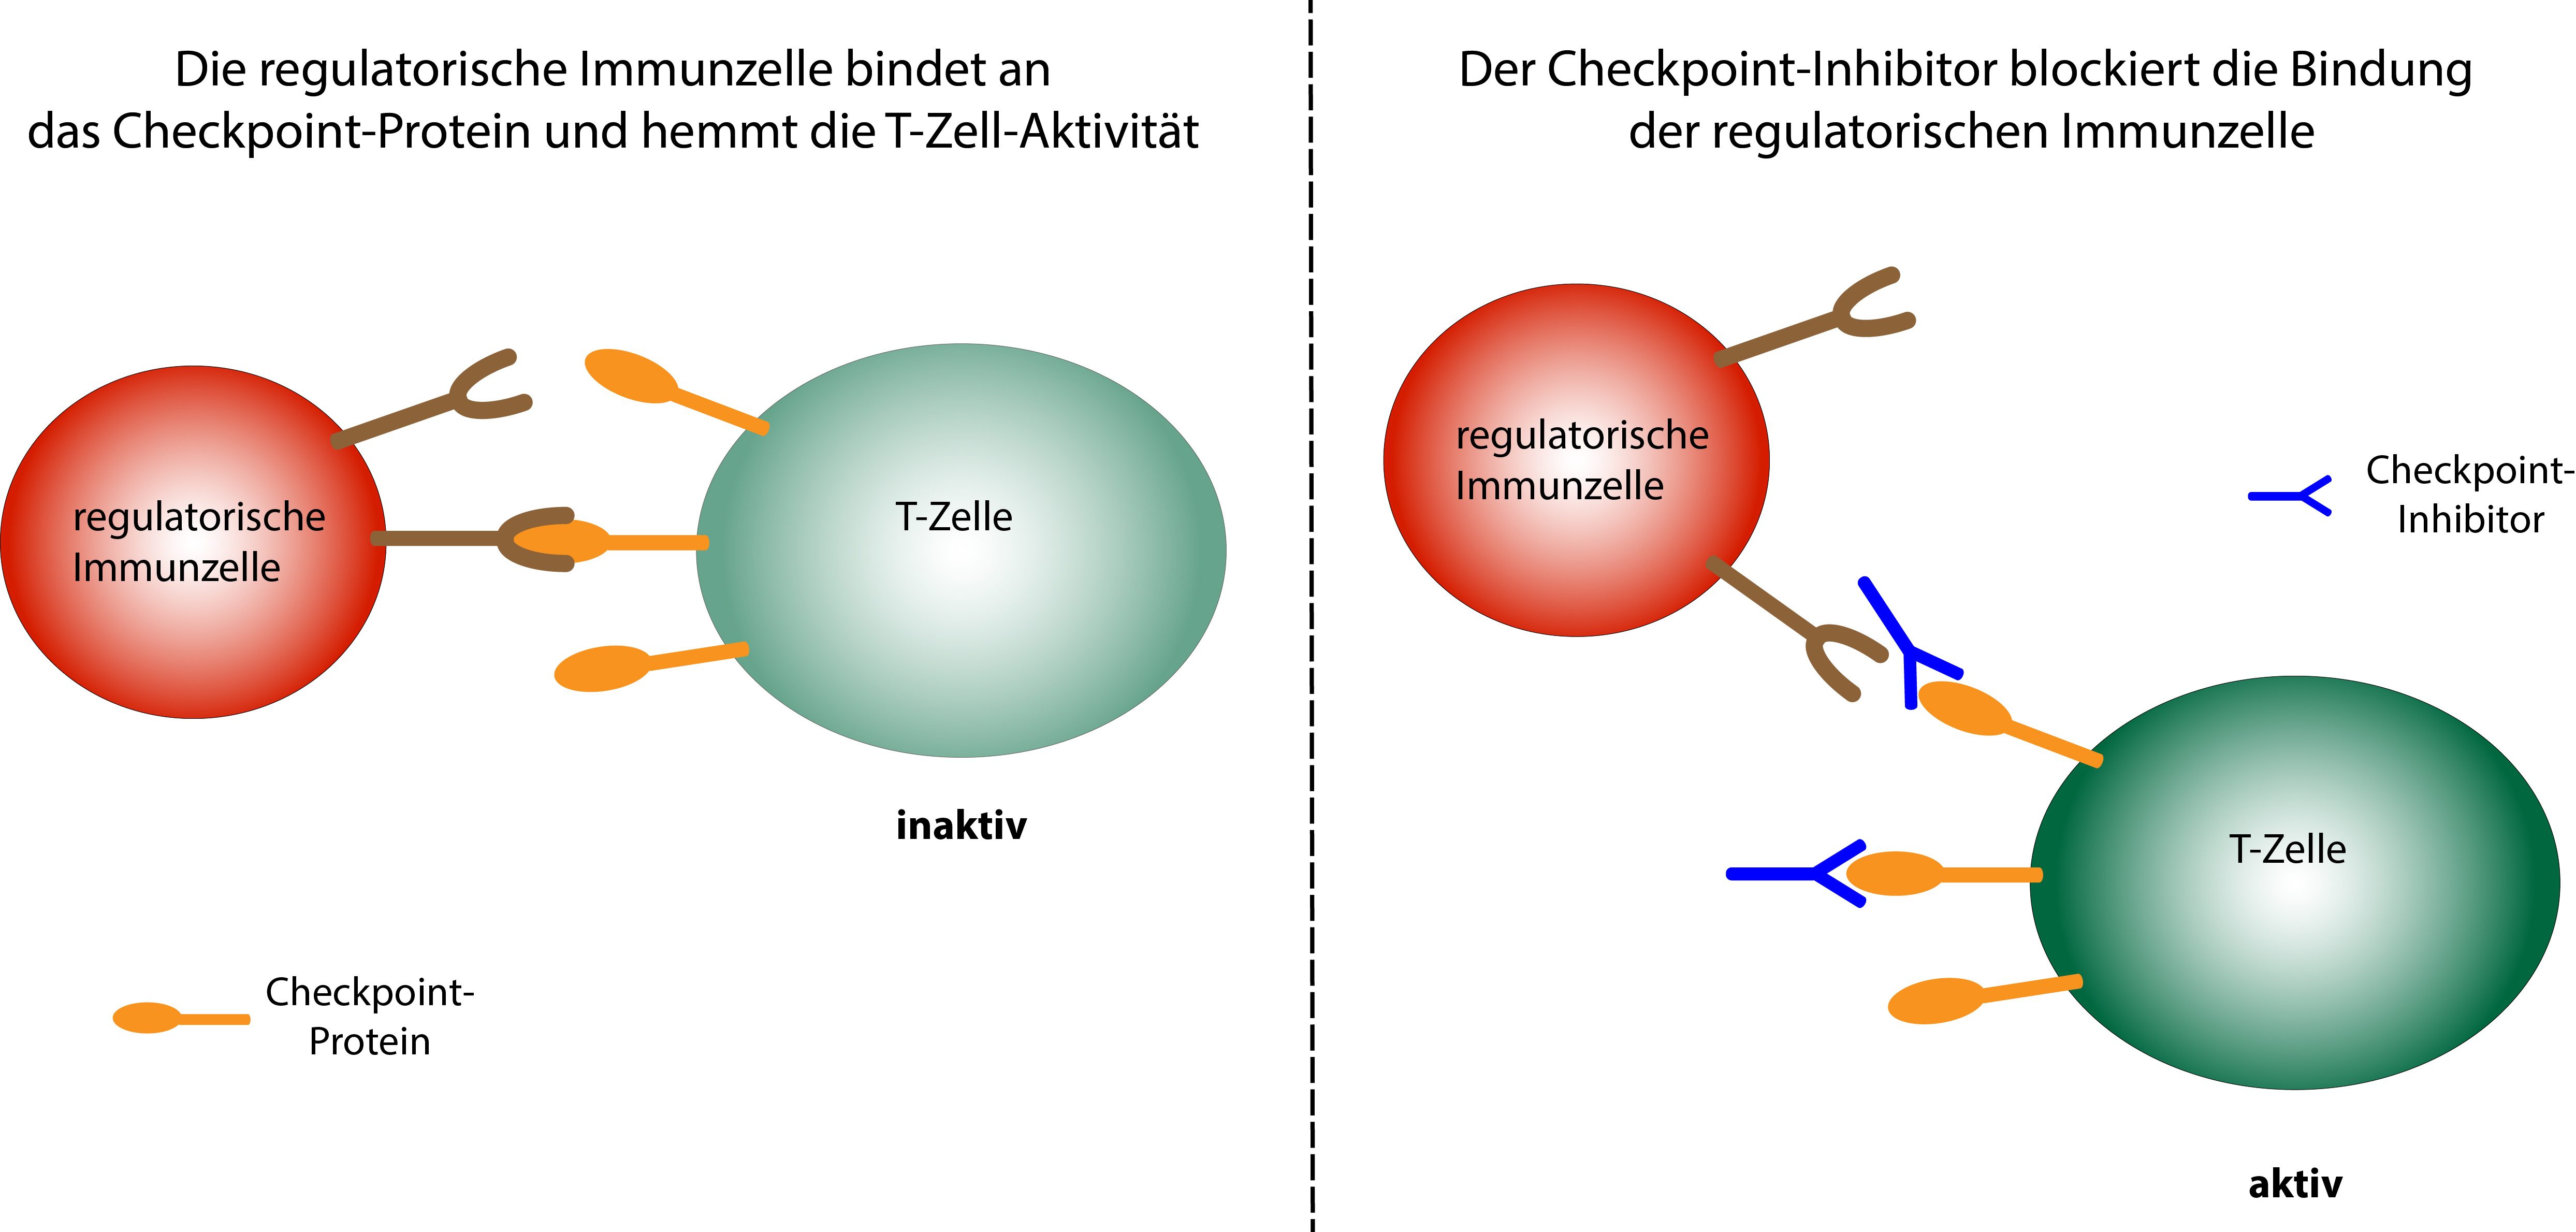 Schematic representation of the mode of action of checkpoint inhibitors. Regulatory immune cells bind to checkpoint proteins on active T cells and thus inhibit T cell activity. Checkpoint inhibitors prevent the binding of regulatory immune cells so that the T-cell remains active.